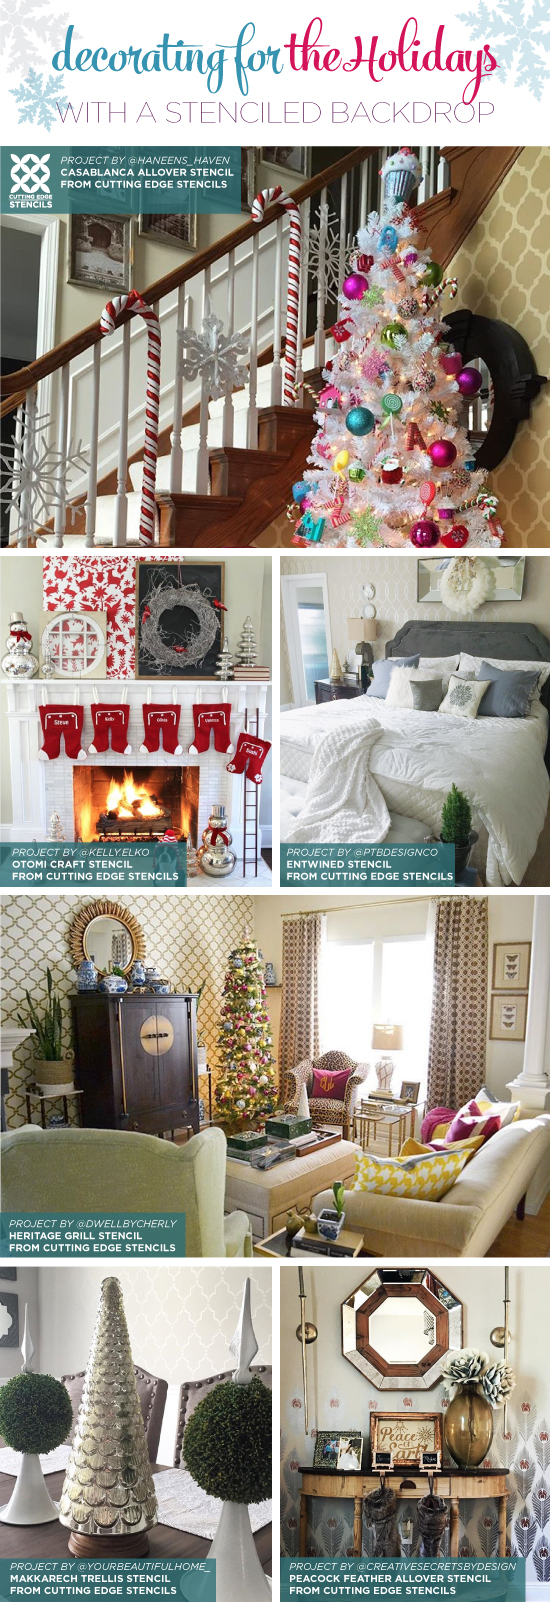 Cutting Edge Stencils shares stenciled accent walls that act as a beautiful backdrop for Christmas decorating. http://www.cuttingedgestencils.com/wall-stencils-stencil-designs.html